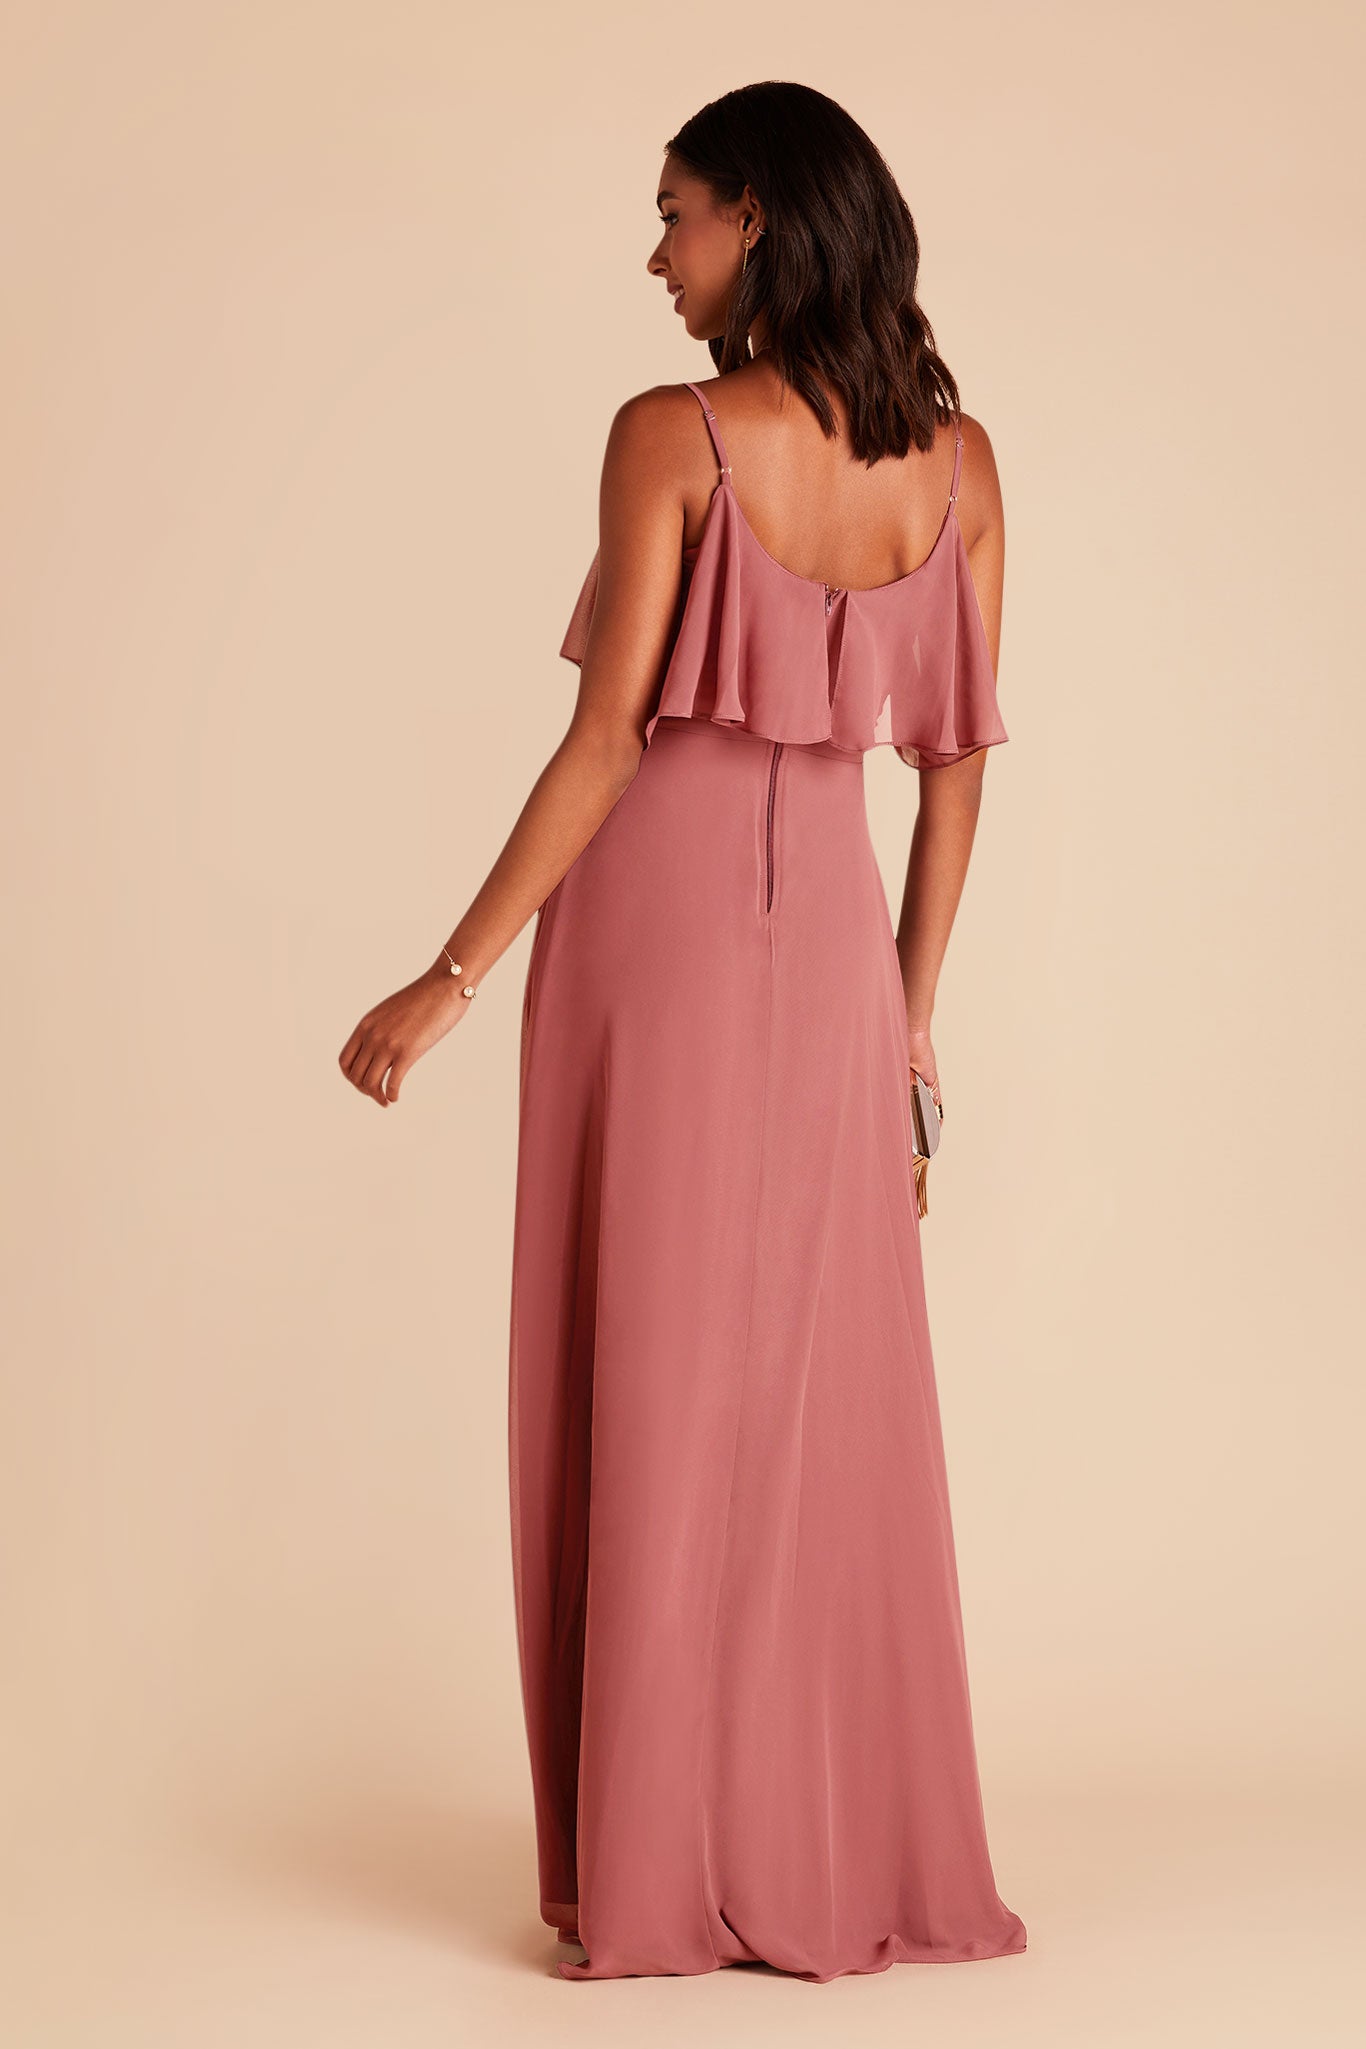 Mulberry Jane Convertible Dress by Birdy Grey